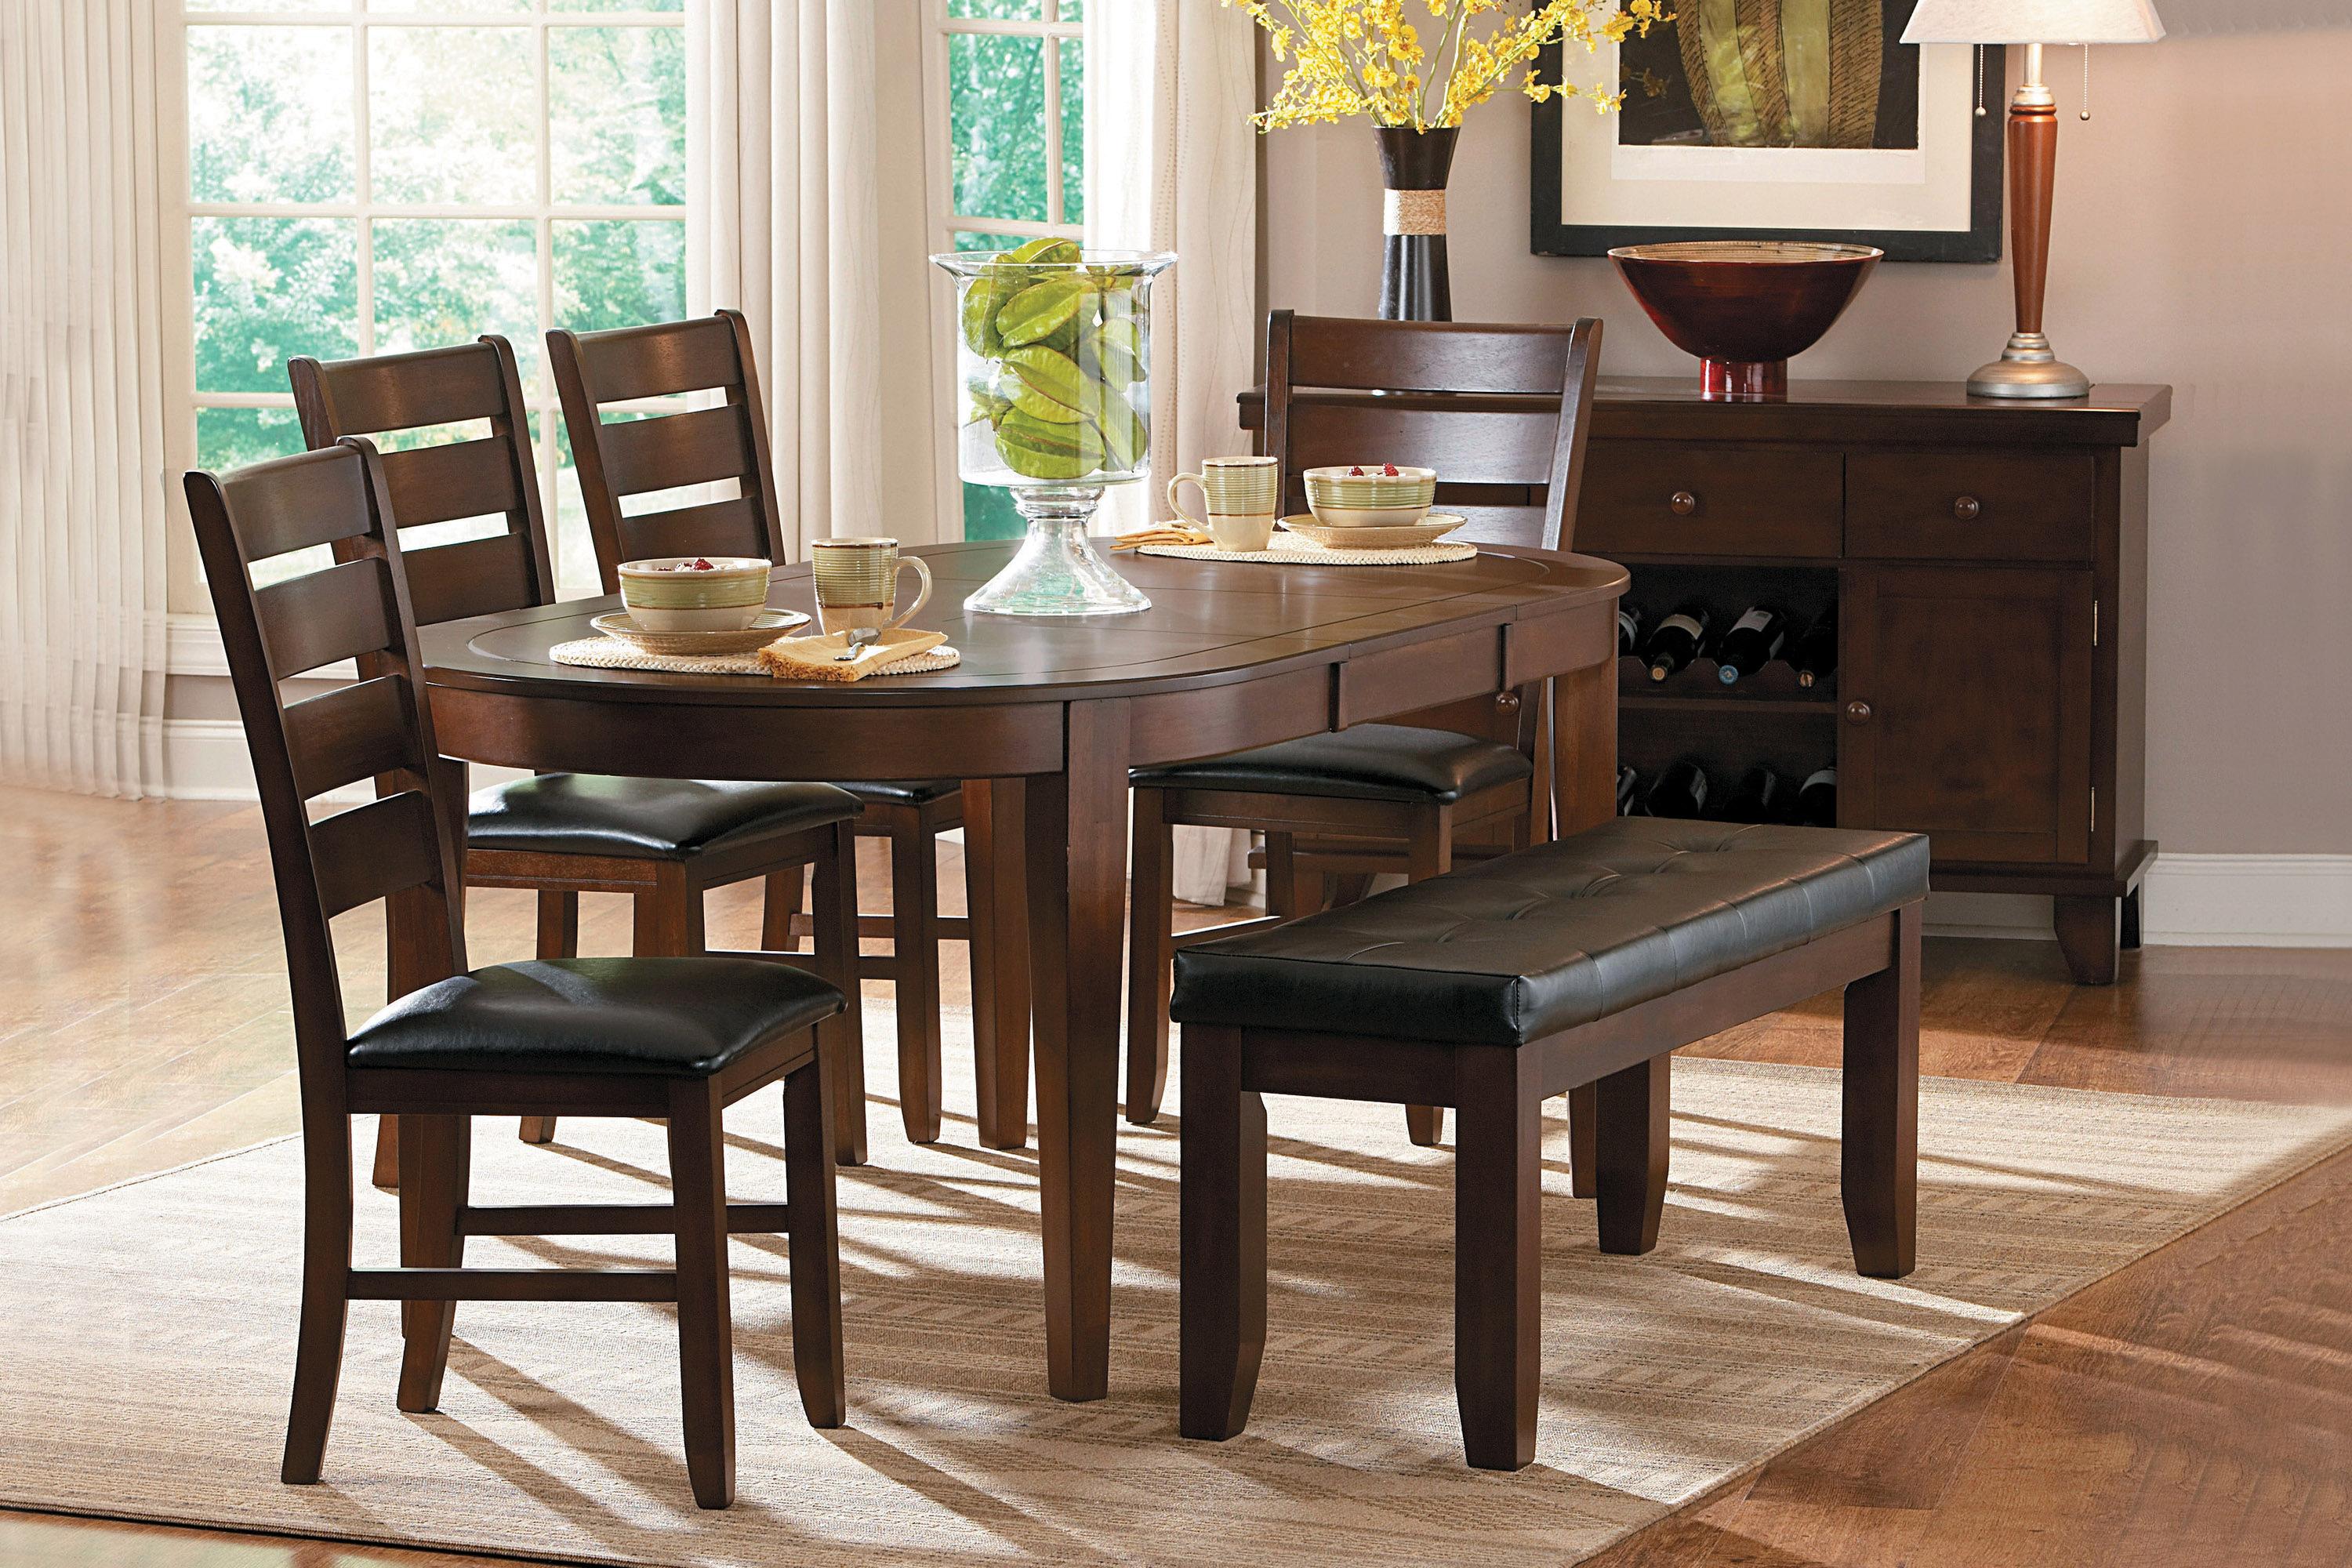 Contemporary Dining Room Set 586-76-48*6PC Ameillia 586-76-48*6PC in Dark Oak Faux Leather